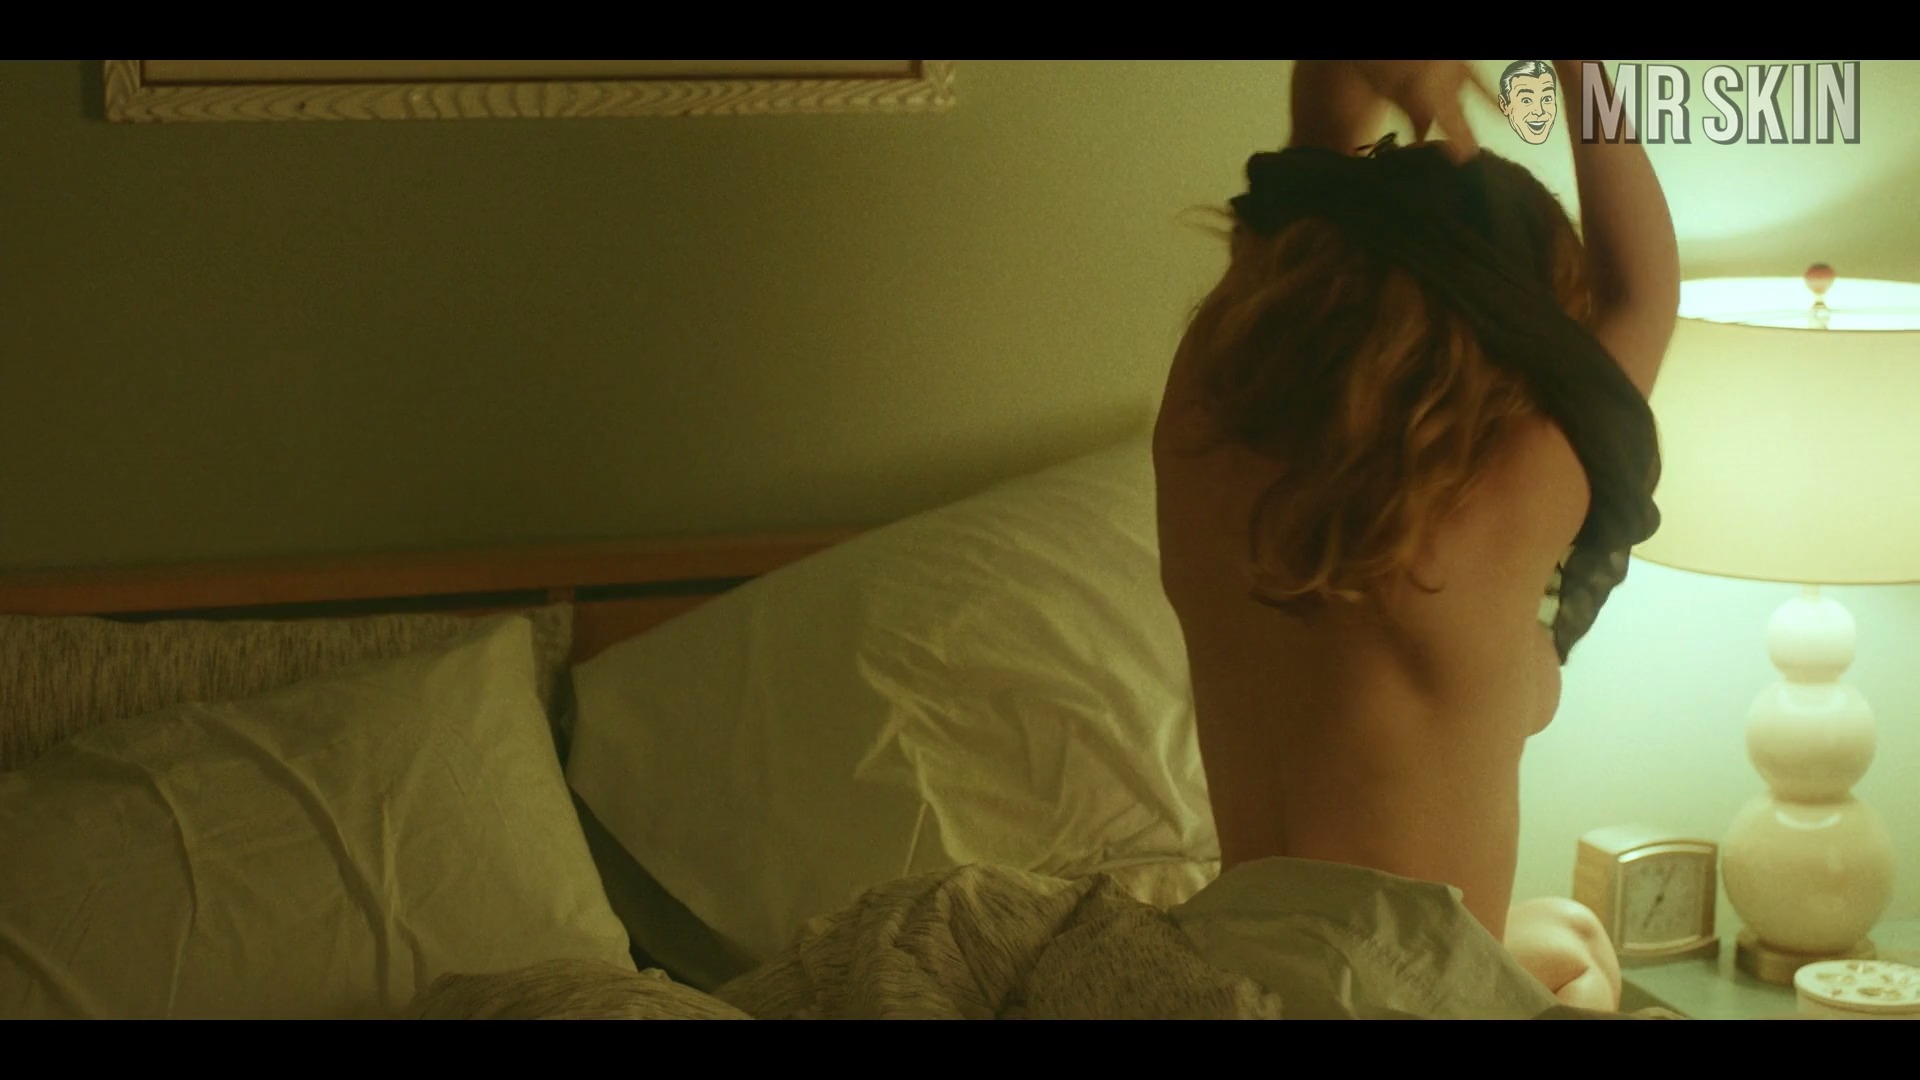 Bethany Joy Lenz is skintastic in this sexy scene! night gown. 